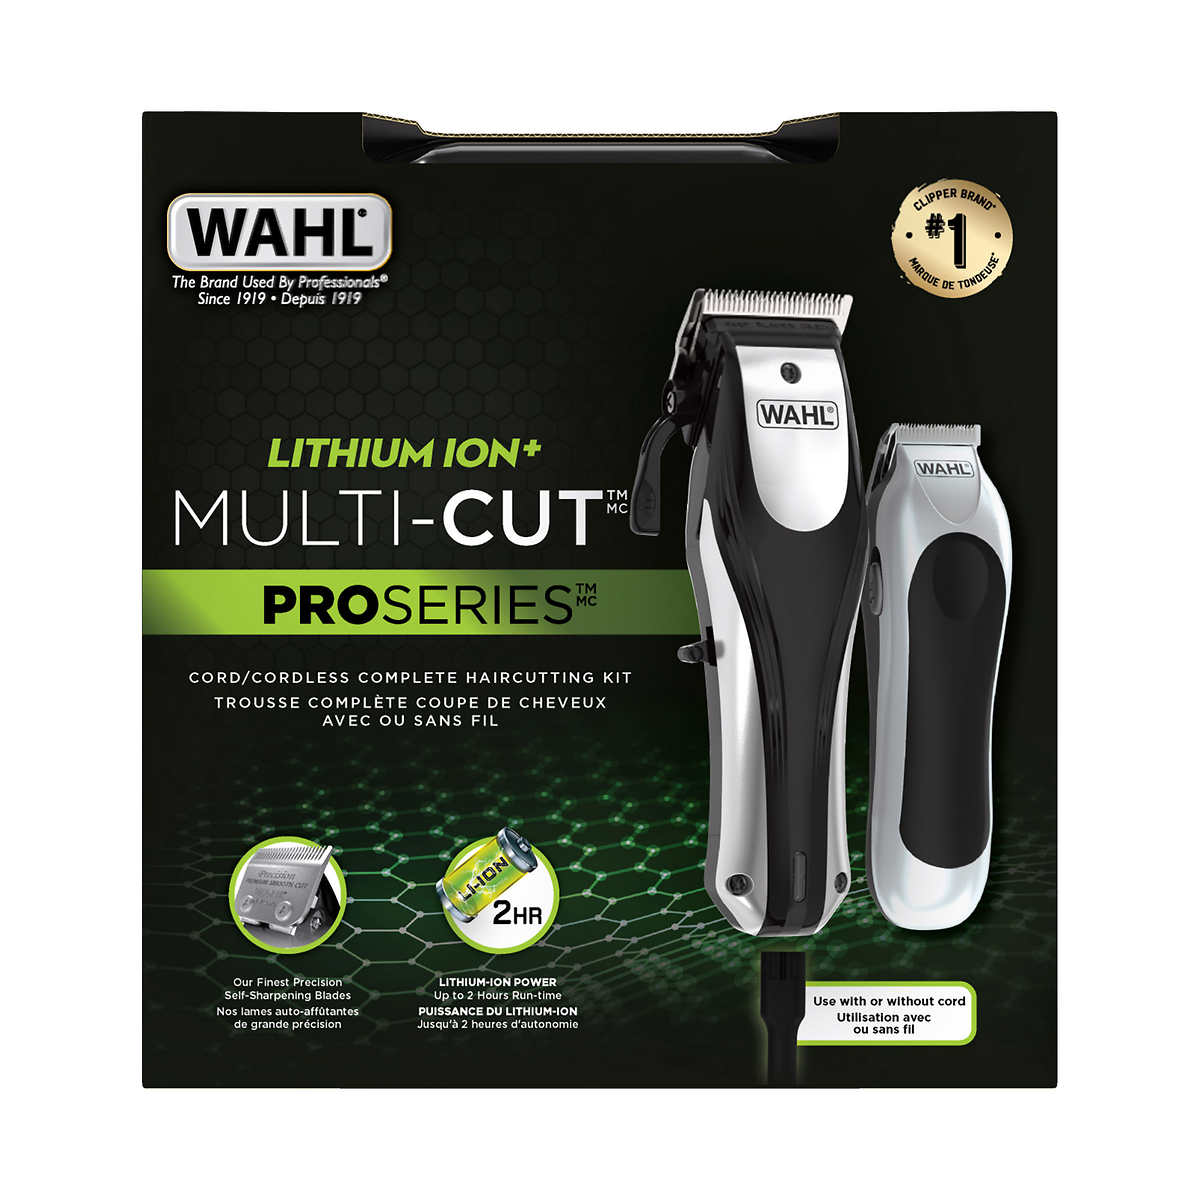 Wahl Pro Series Multi-Cut Cord/Cordless Complete Haircutting Kit, returned item